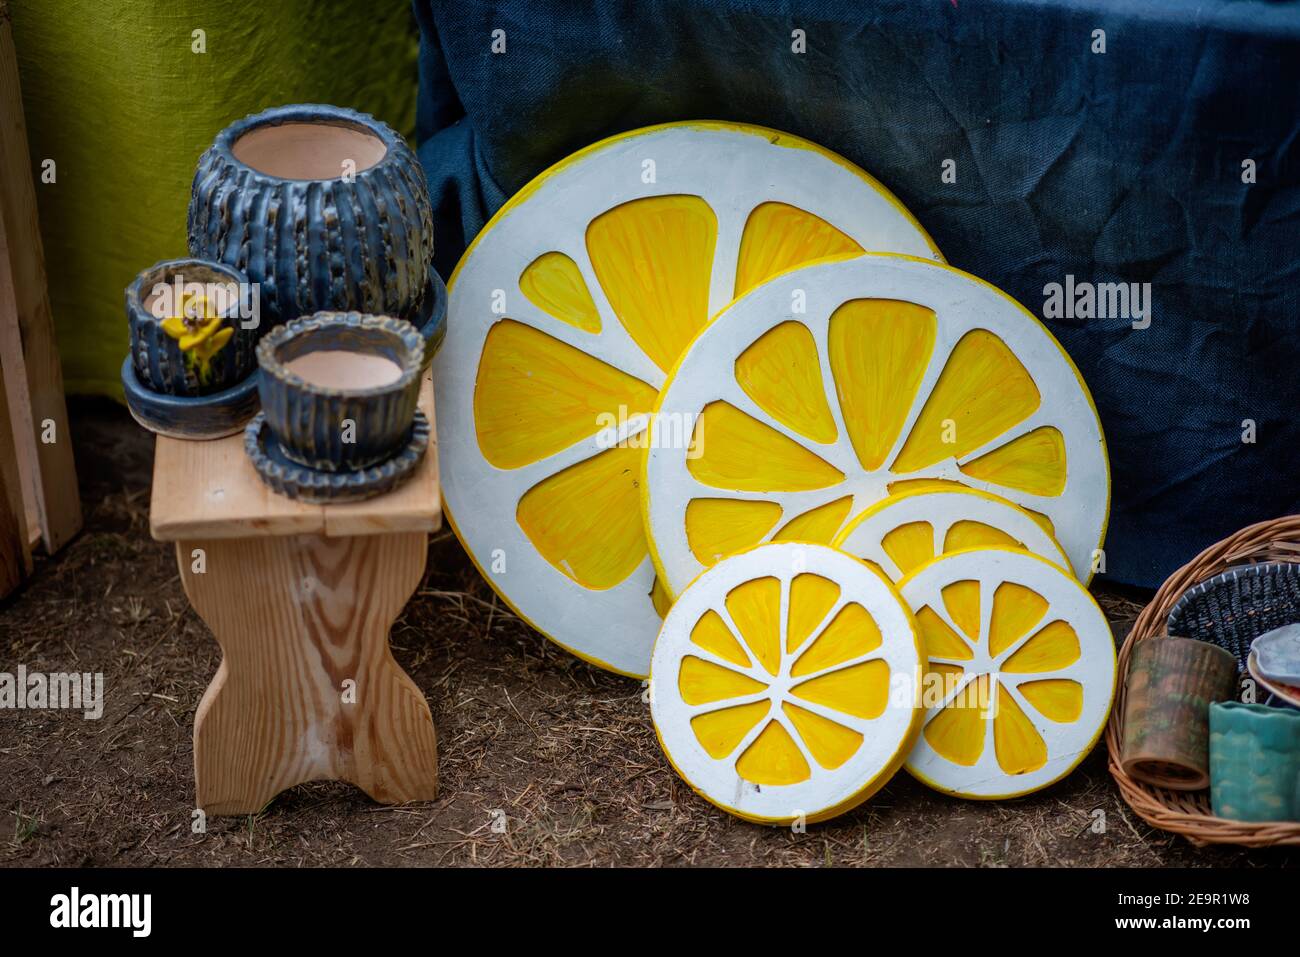 At the festival street fair, handmade wood products are sold: flowerpots, stools, decorative elements in the form of yellow lemons, candlesticks. Stock Photo